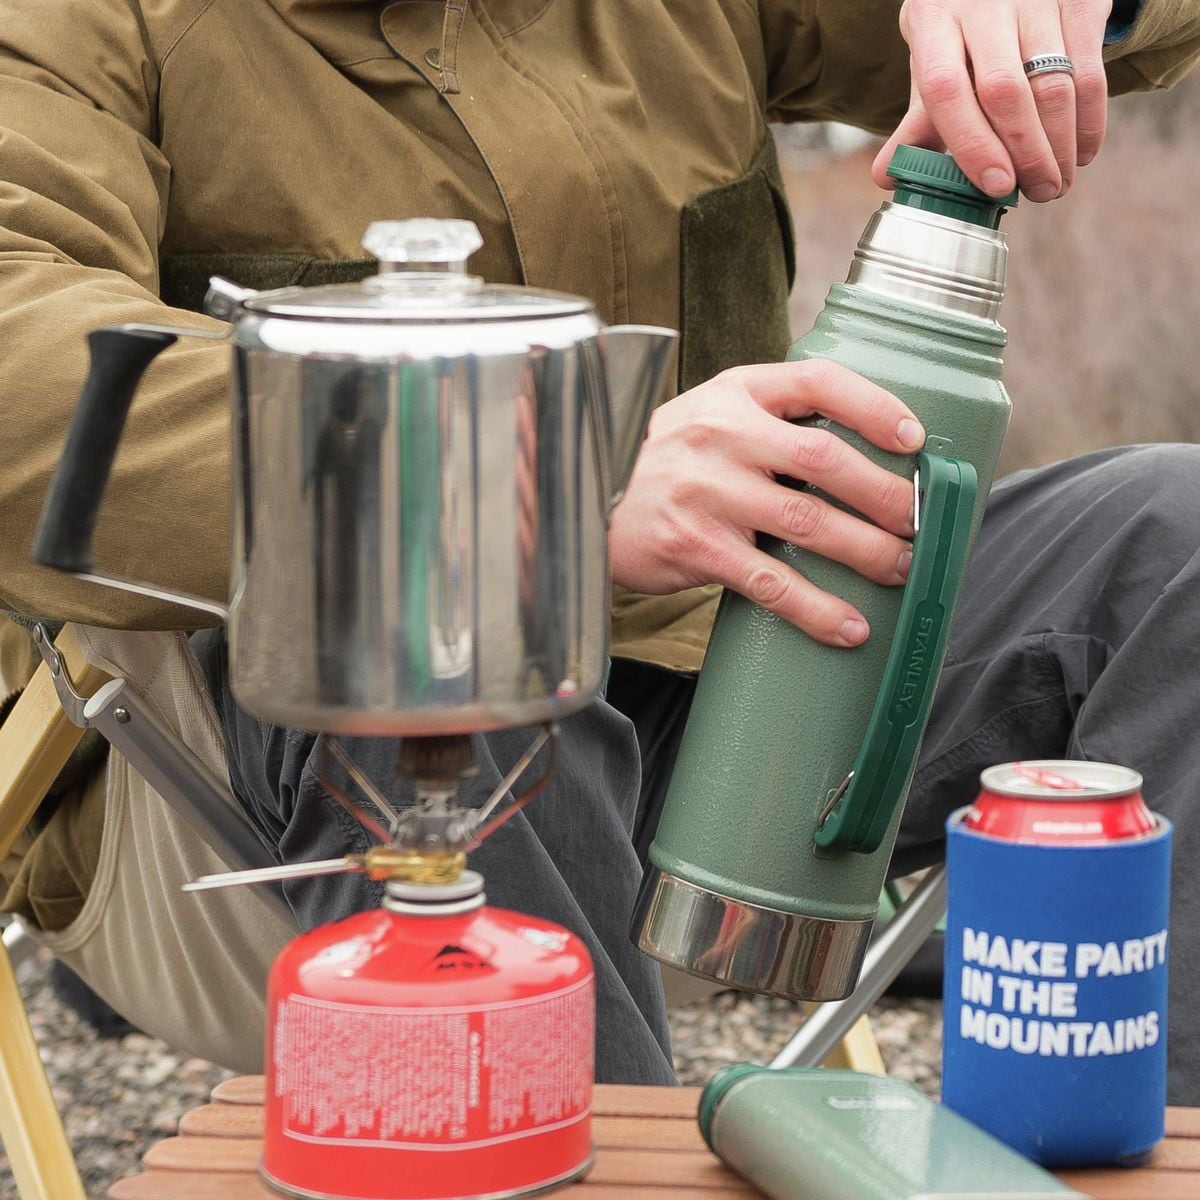 The 9 Best Camping Coffee Percolators - Stanley, GSI Outdoors